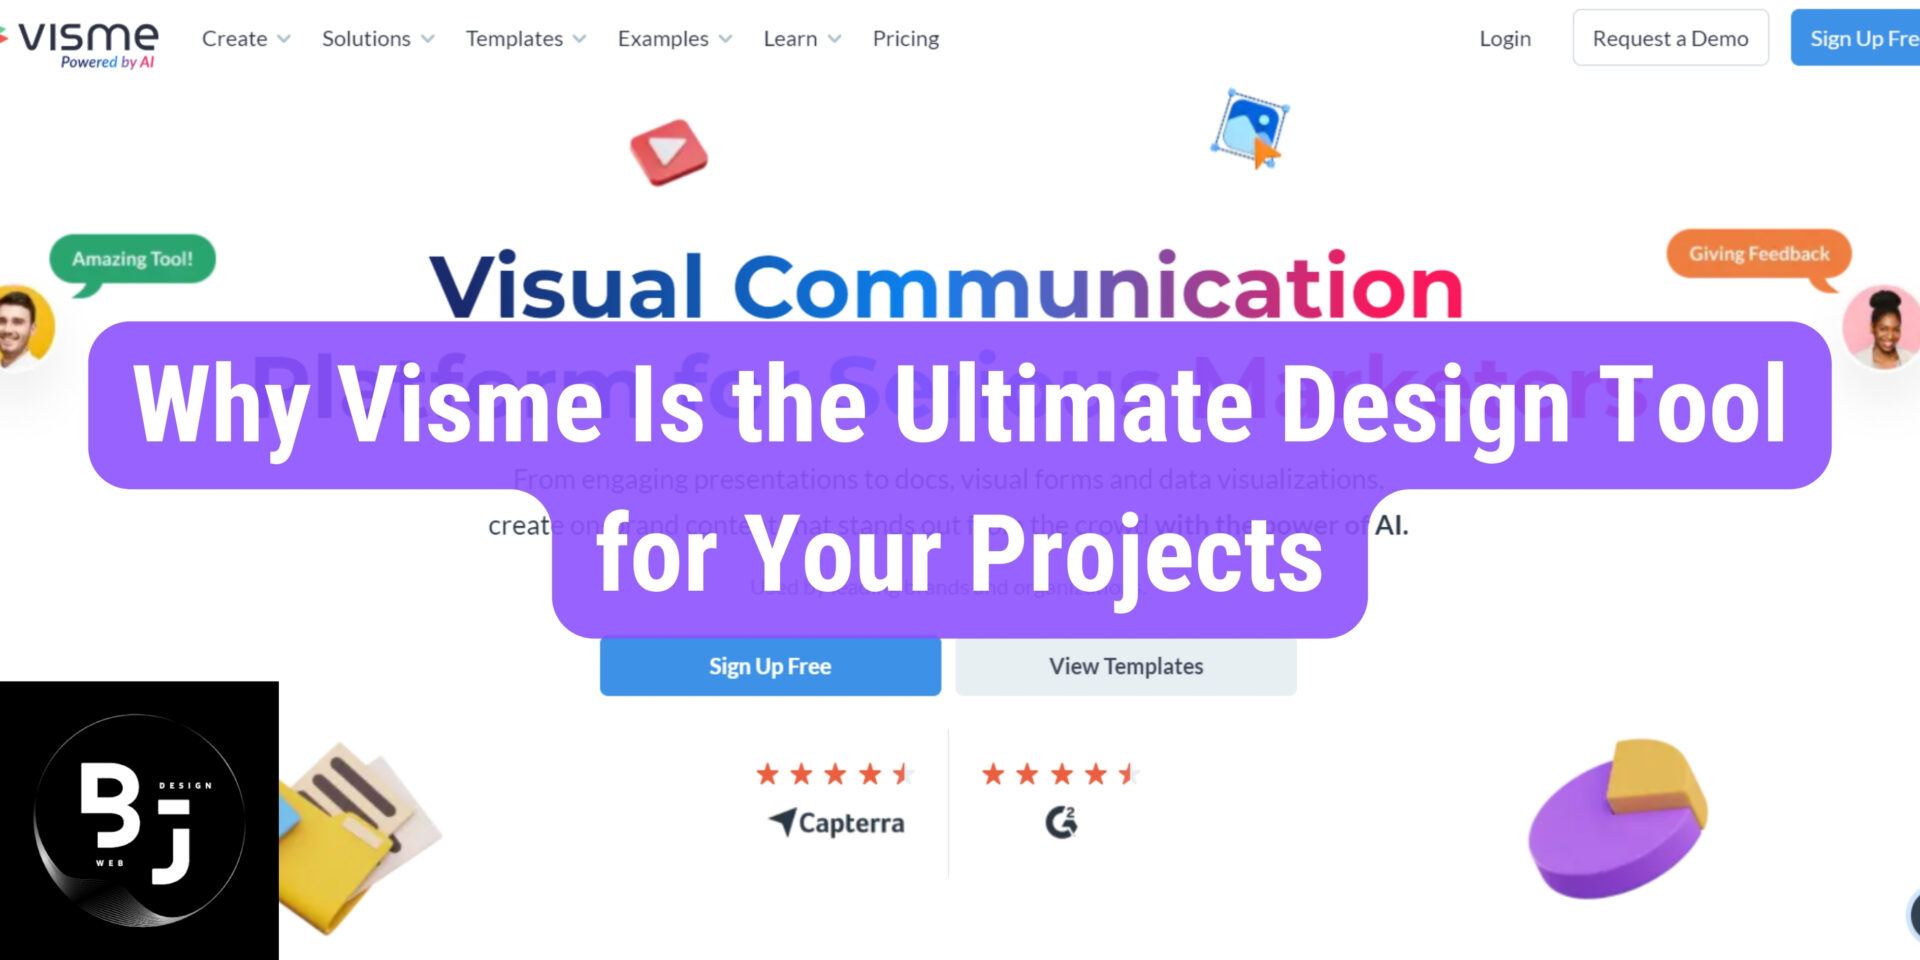 Why Visme Is the Ultimate Design Tool for Your Projects